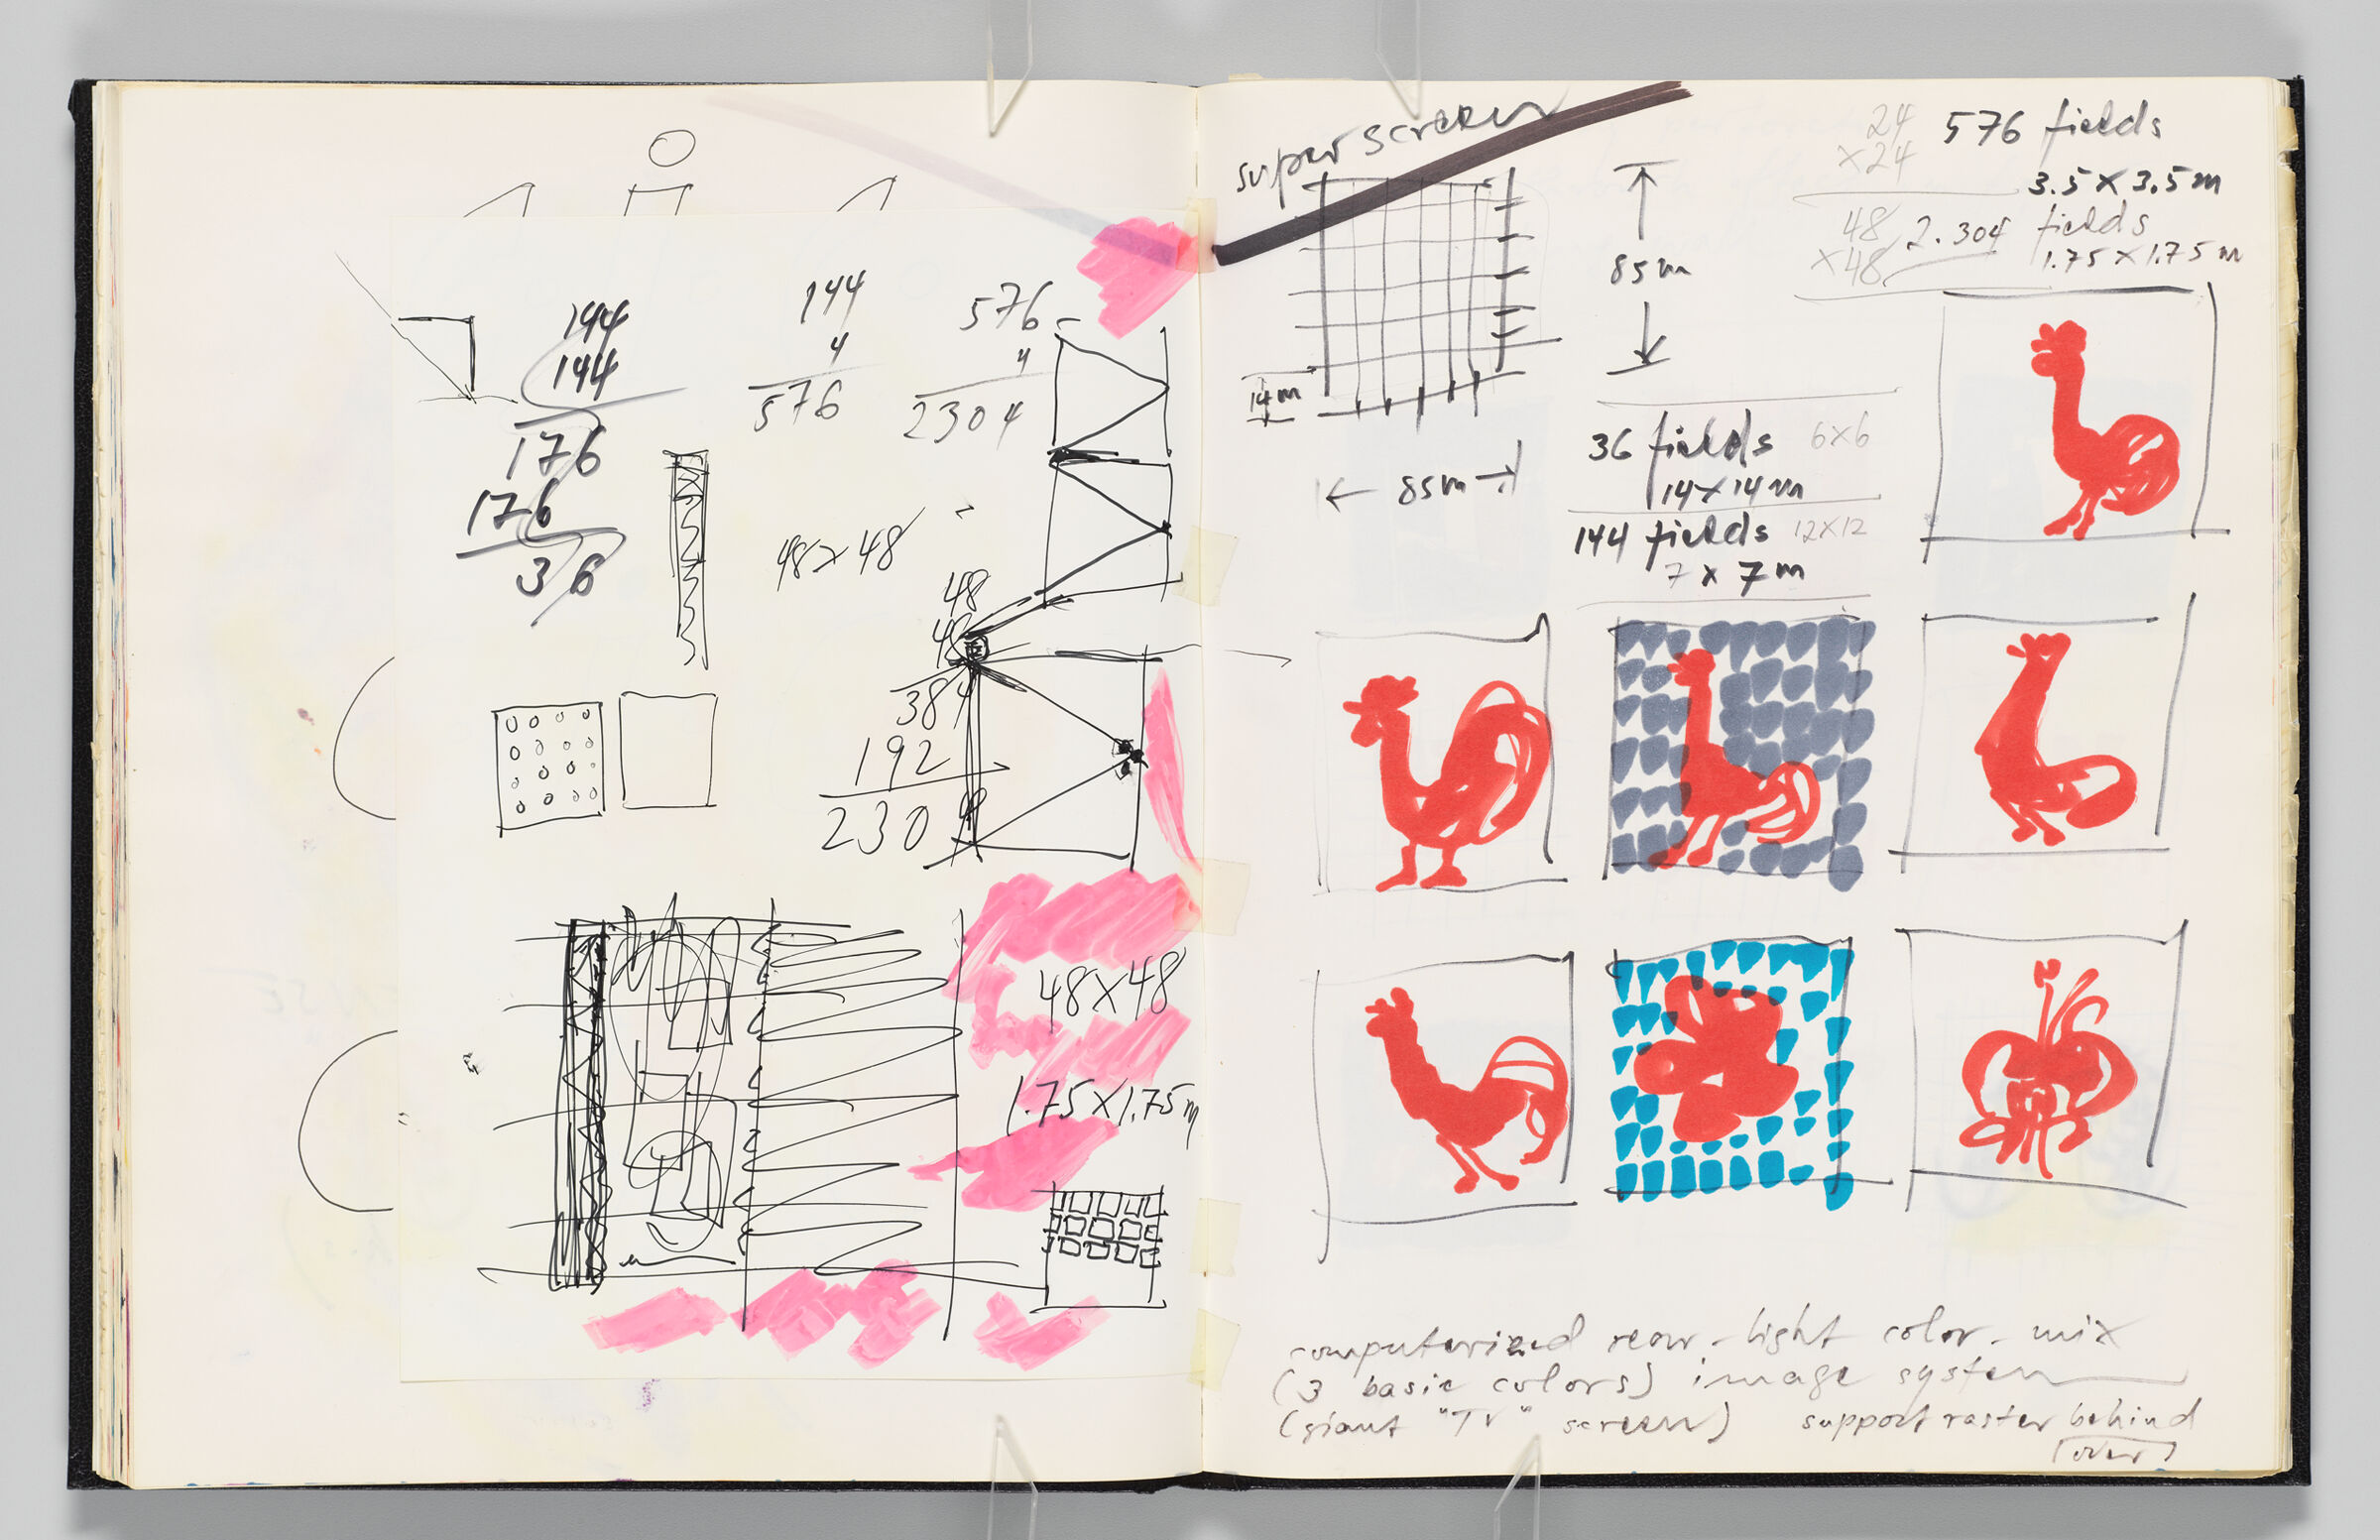 Untitled (Bleed-Through Of Previous Page, Color Transfer, Notes, And Adhered Page Of Measurements, Left Page); Untitled (Rooster Designs For Screens, Right Page)